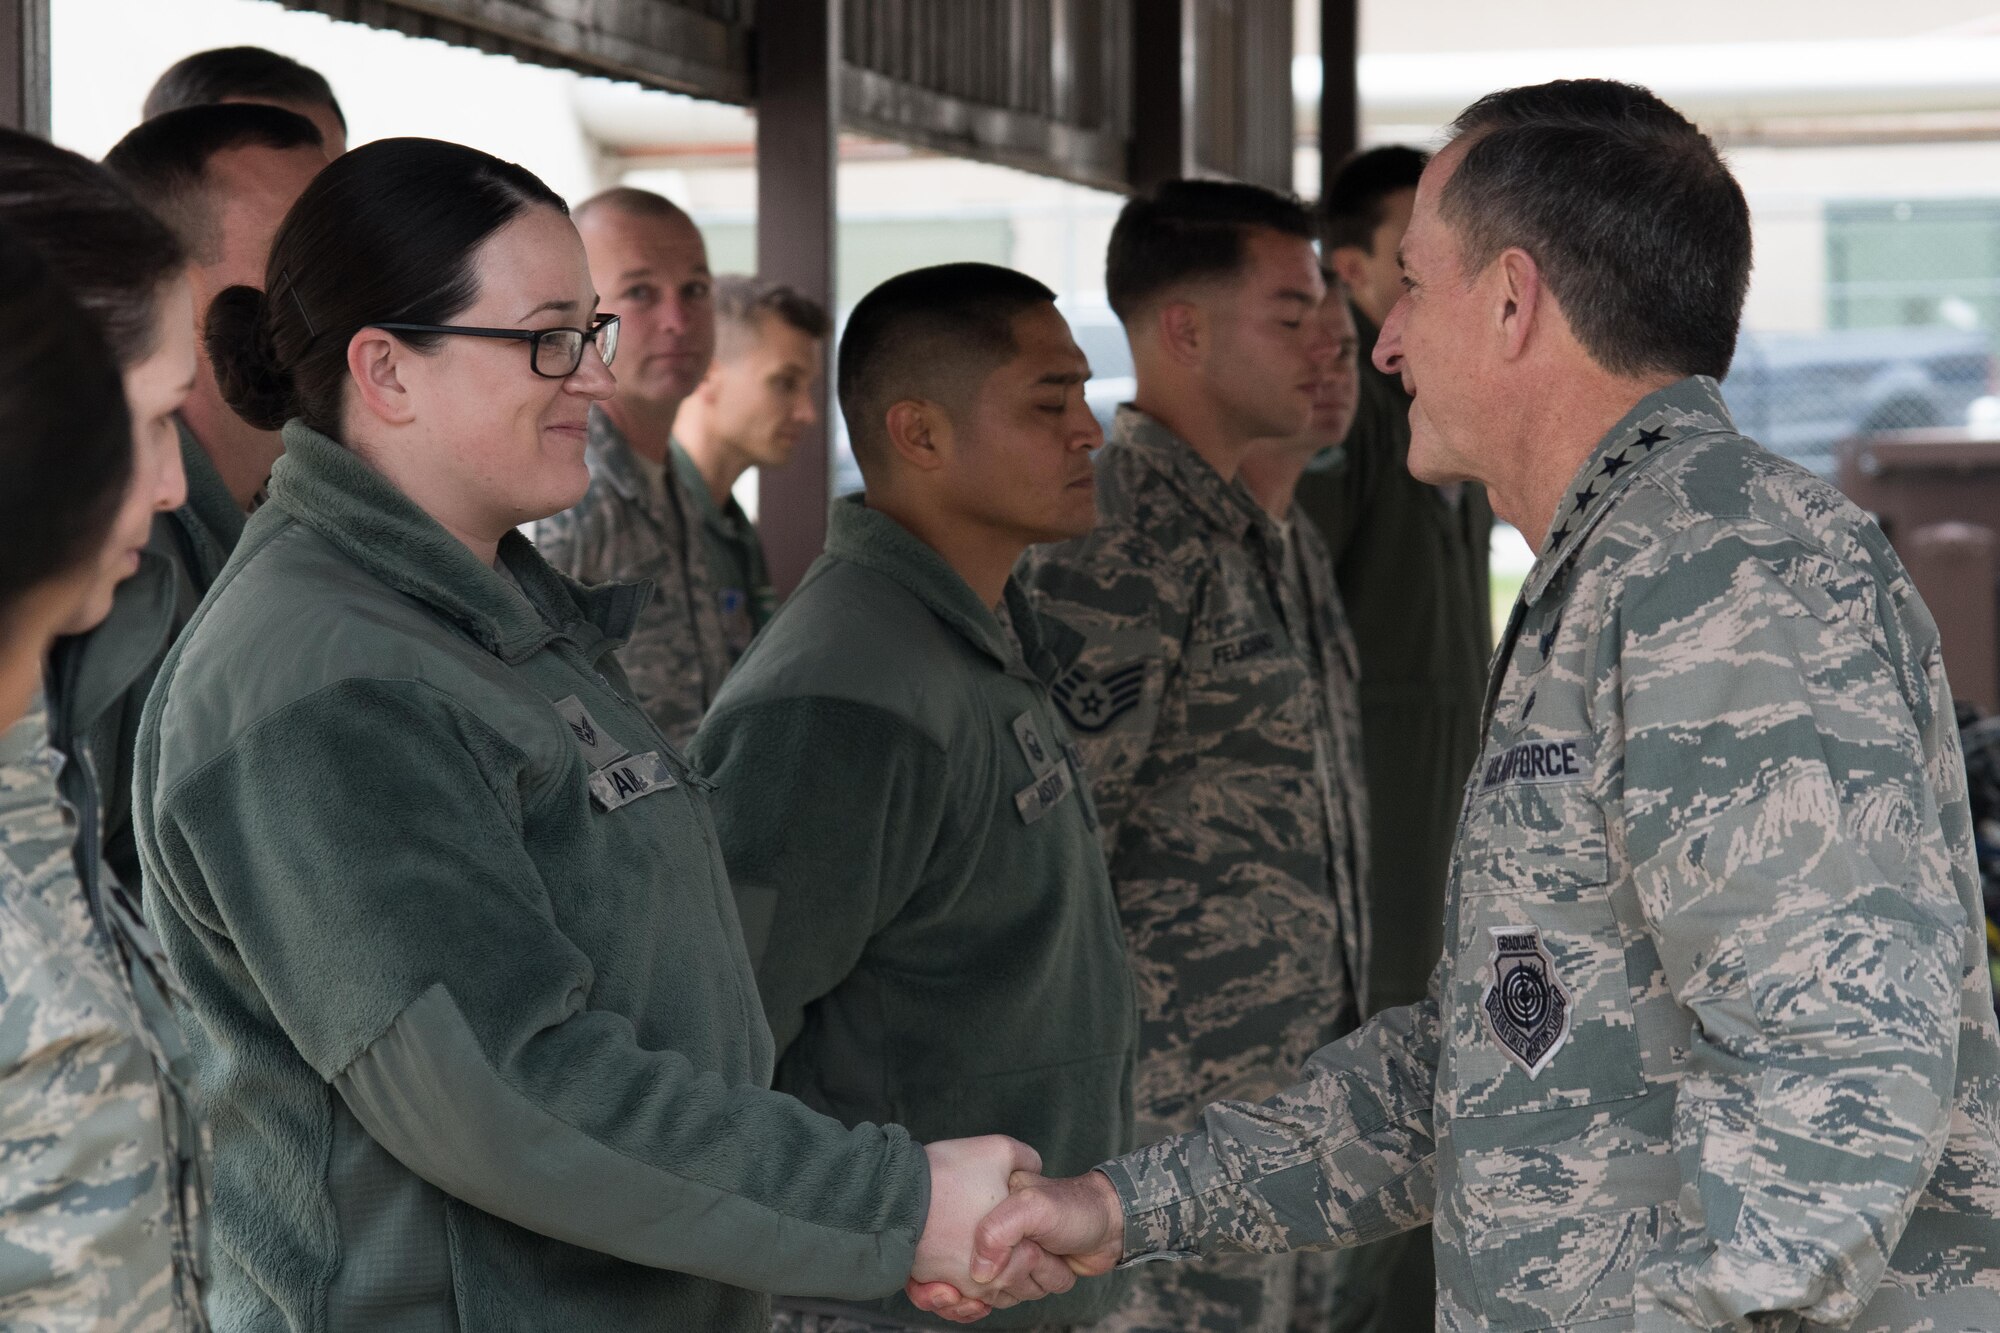 U.S. Air Force Staff Sgt. Christina Bair, 51st Fighter Wing weapons safety manager, receives a coin from Air Force Chief of Staff David L. Goldfein during a coining ceremony at Osan Air Base, Republic of Korea, Oct. 31, 2016. Goldfein rewarded high-performance Osan Airmen with his coin for their part in executing the 51st Fighter Wing mission. (U.S. Air Force photo by Senior Airman Dillian Bamman)